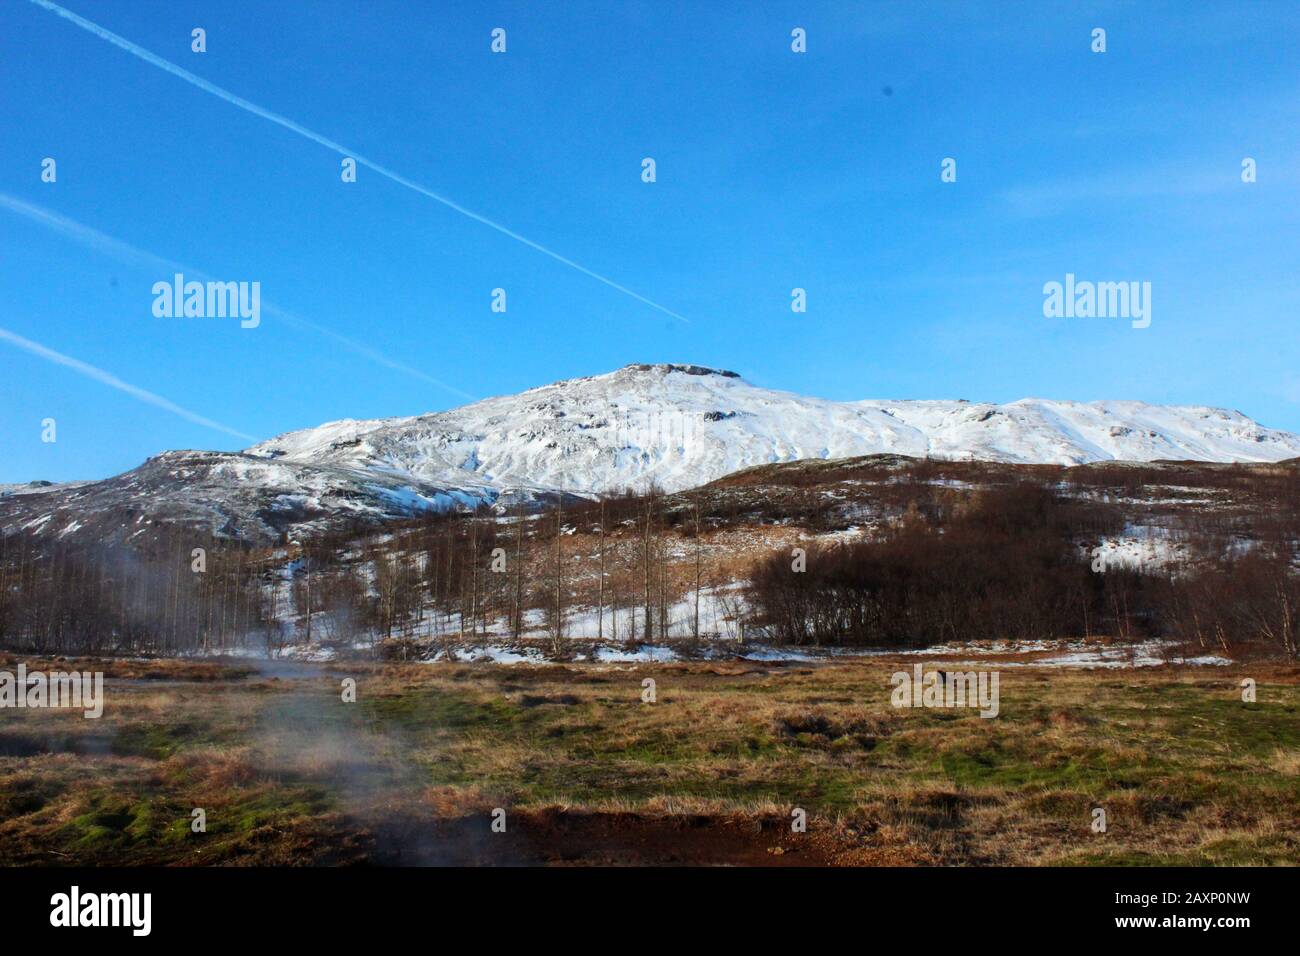 Stunning snowy mountain scenery from Geysir Park, Iceland on a bright day Stock Photo